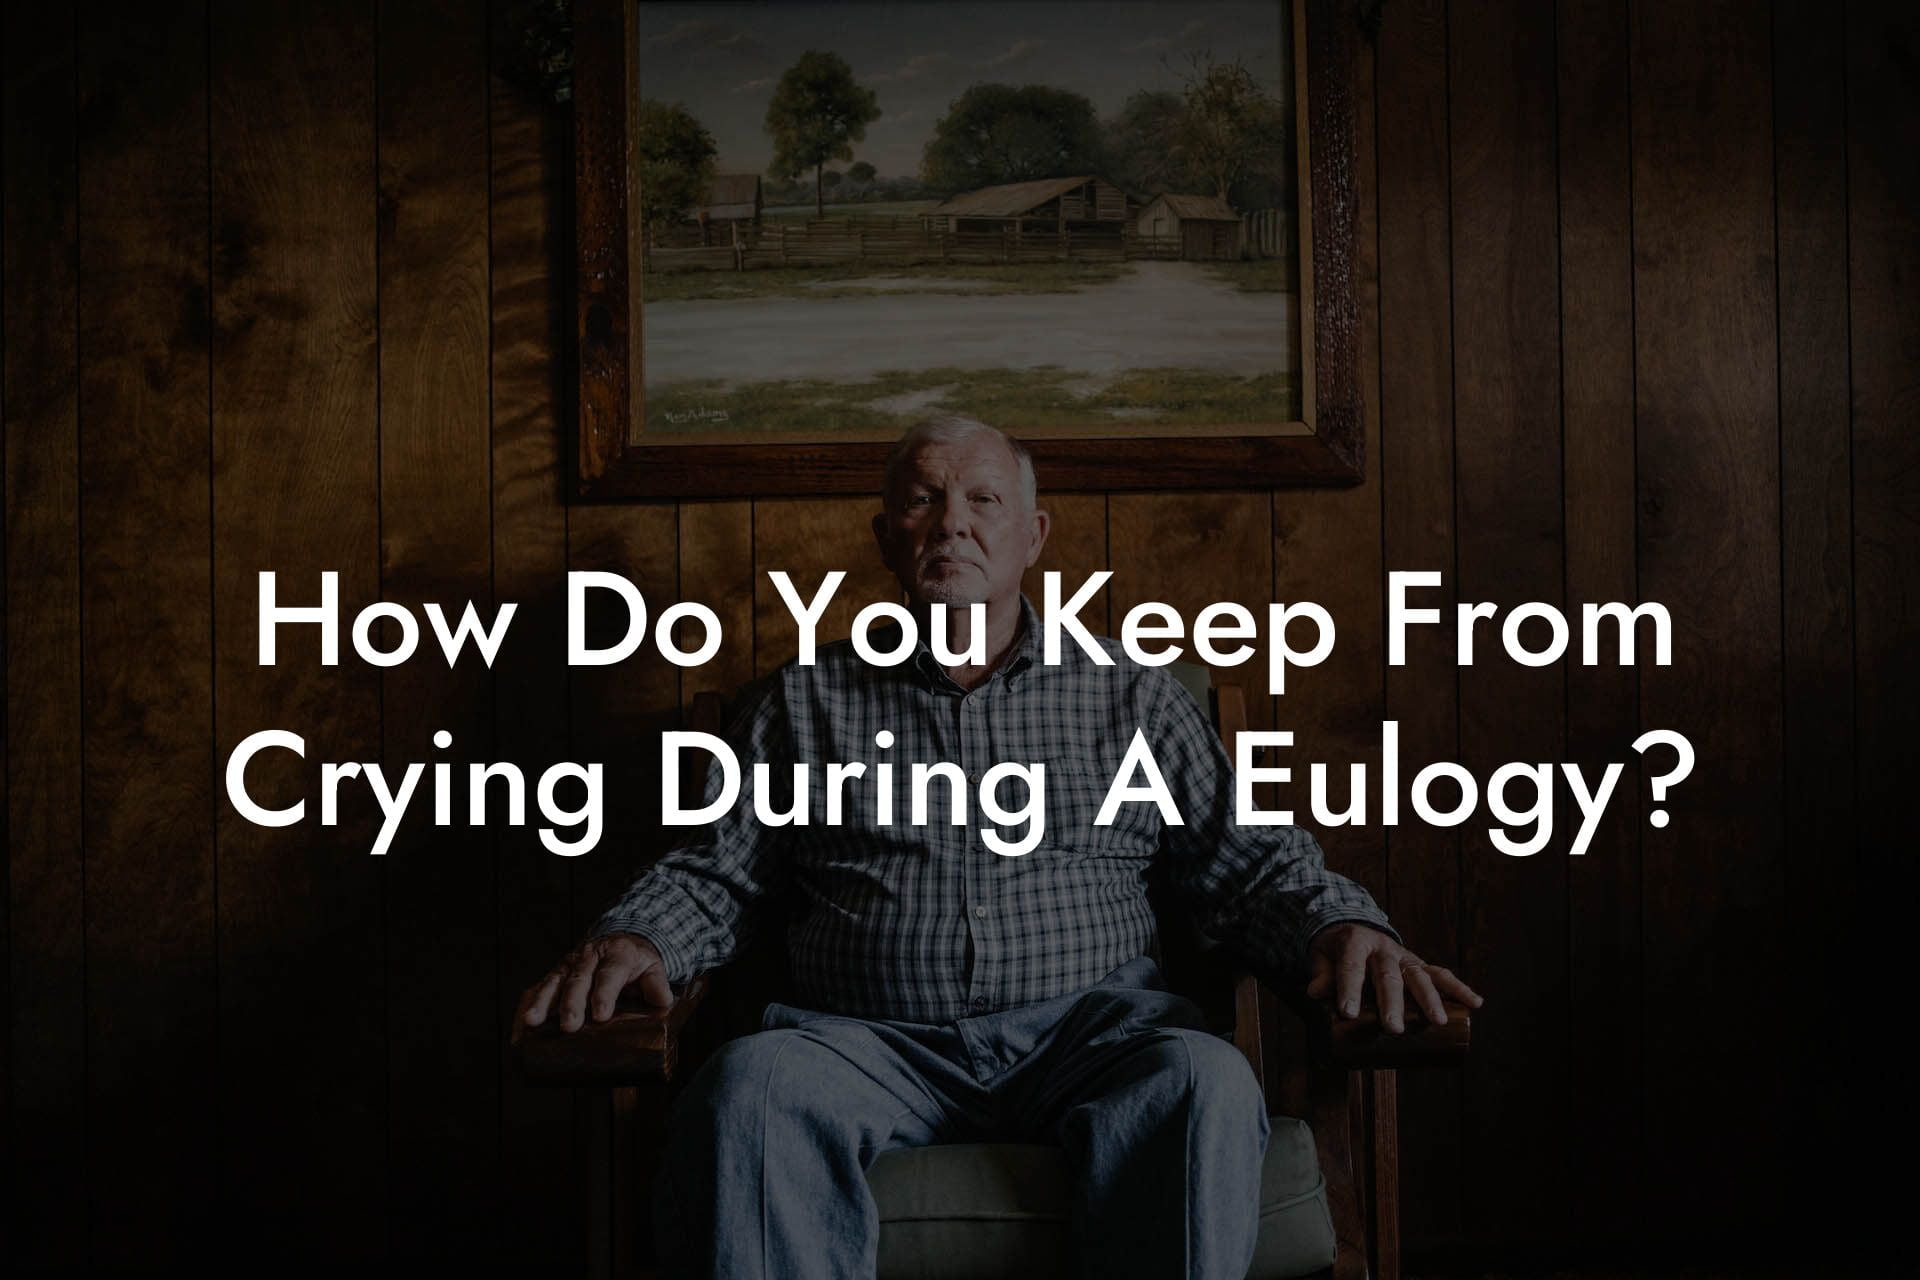 How Do You Keep From Crying During A Eulogy?